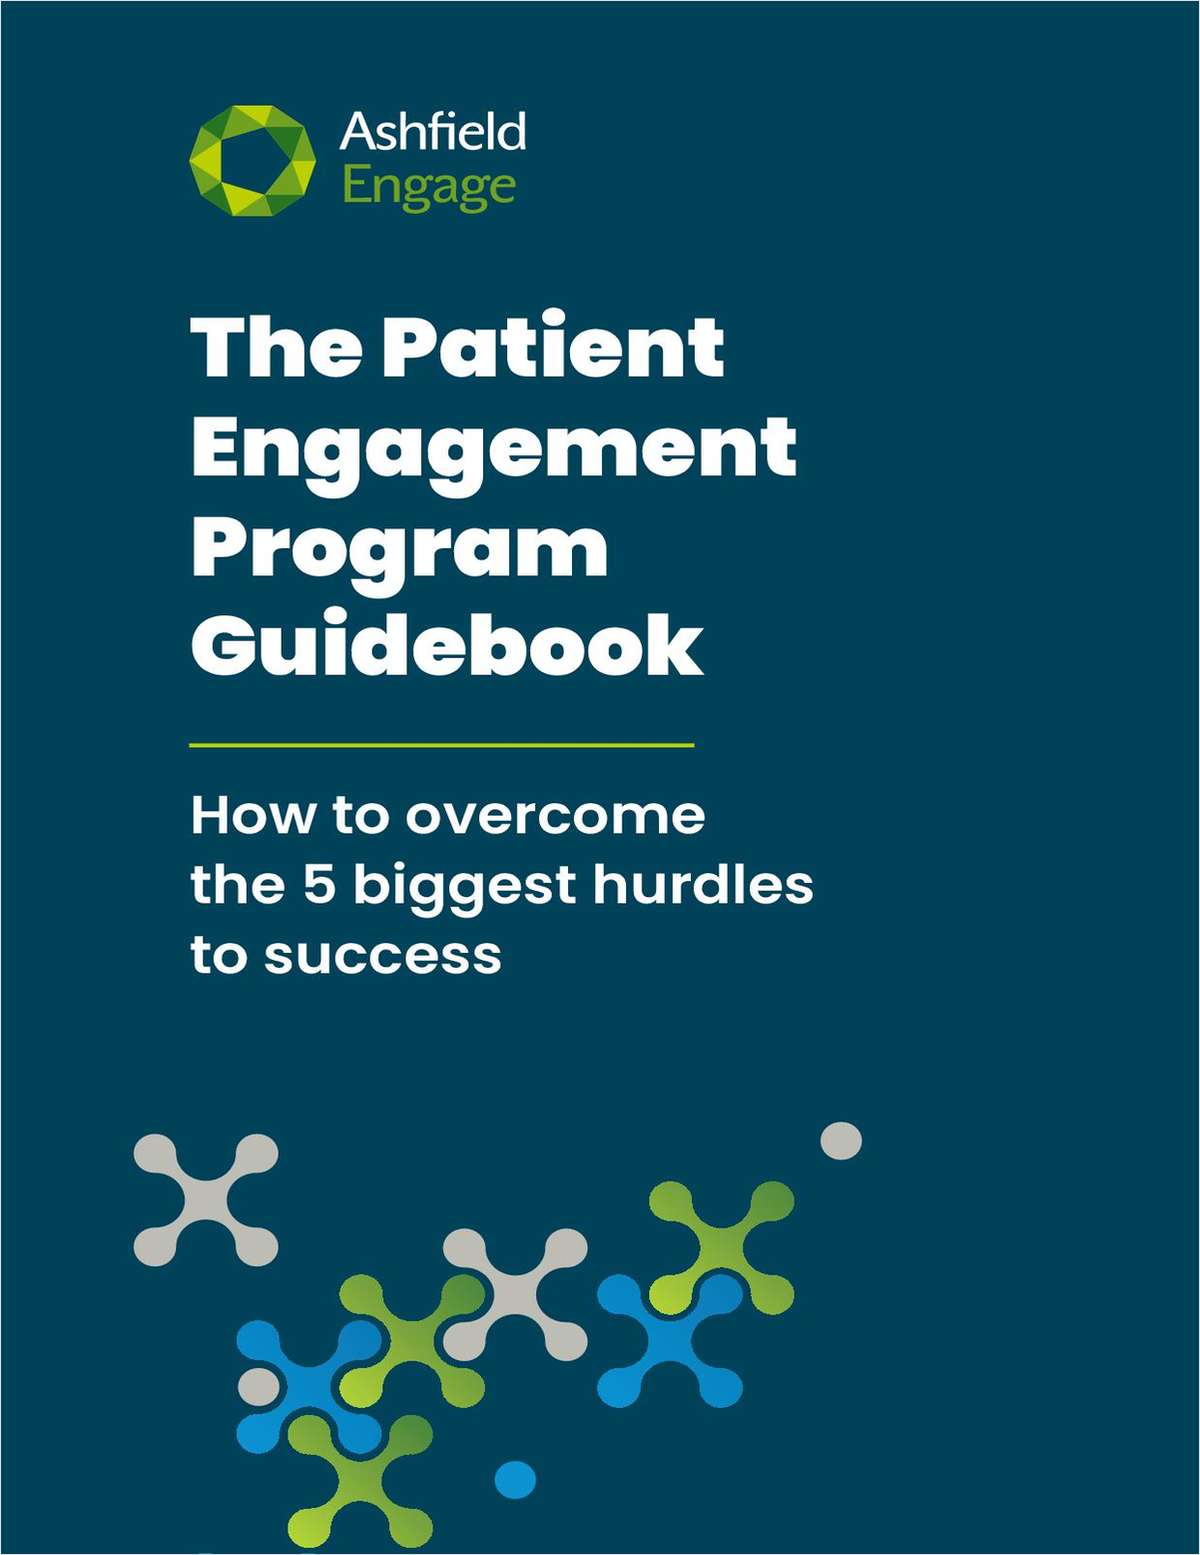 The Patient Engagement Guidebook